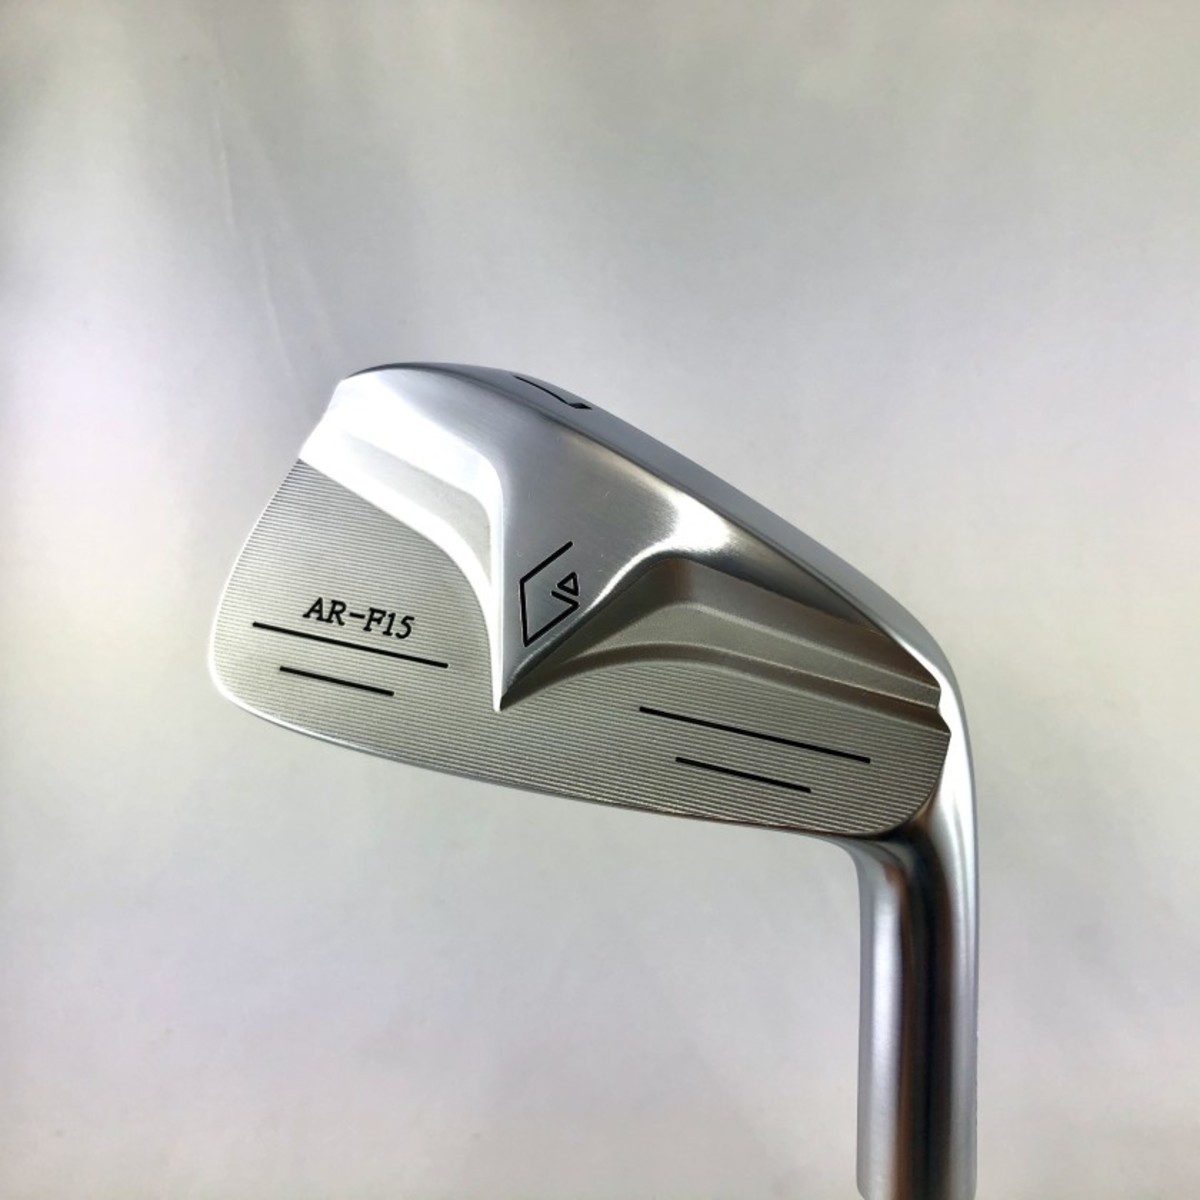 Argolf's AR-F15 irons are the French company's second dip into clubs other than the milled putters it built a reputation on. In 2019, Argolf introduced the AR-F18 irons. 